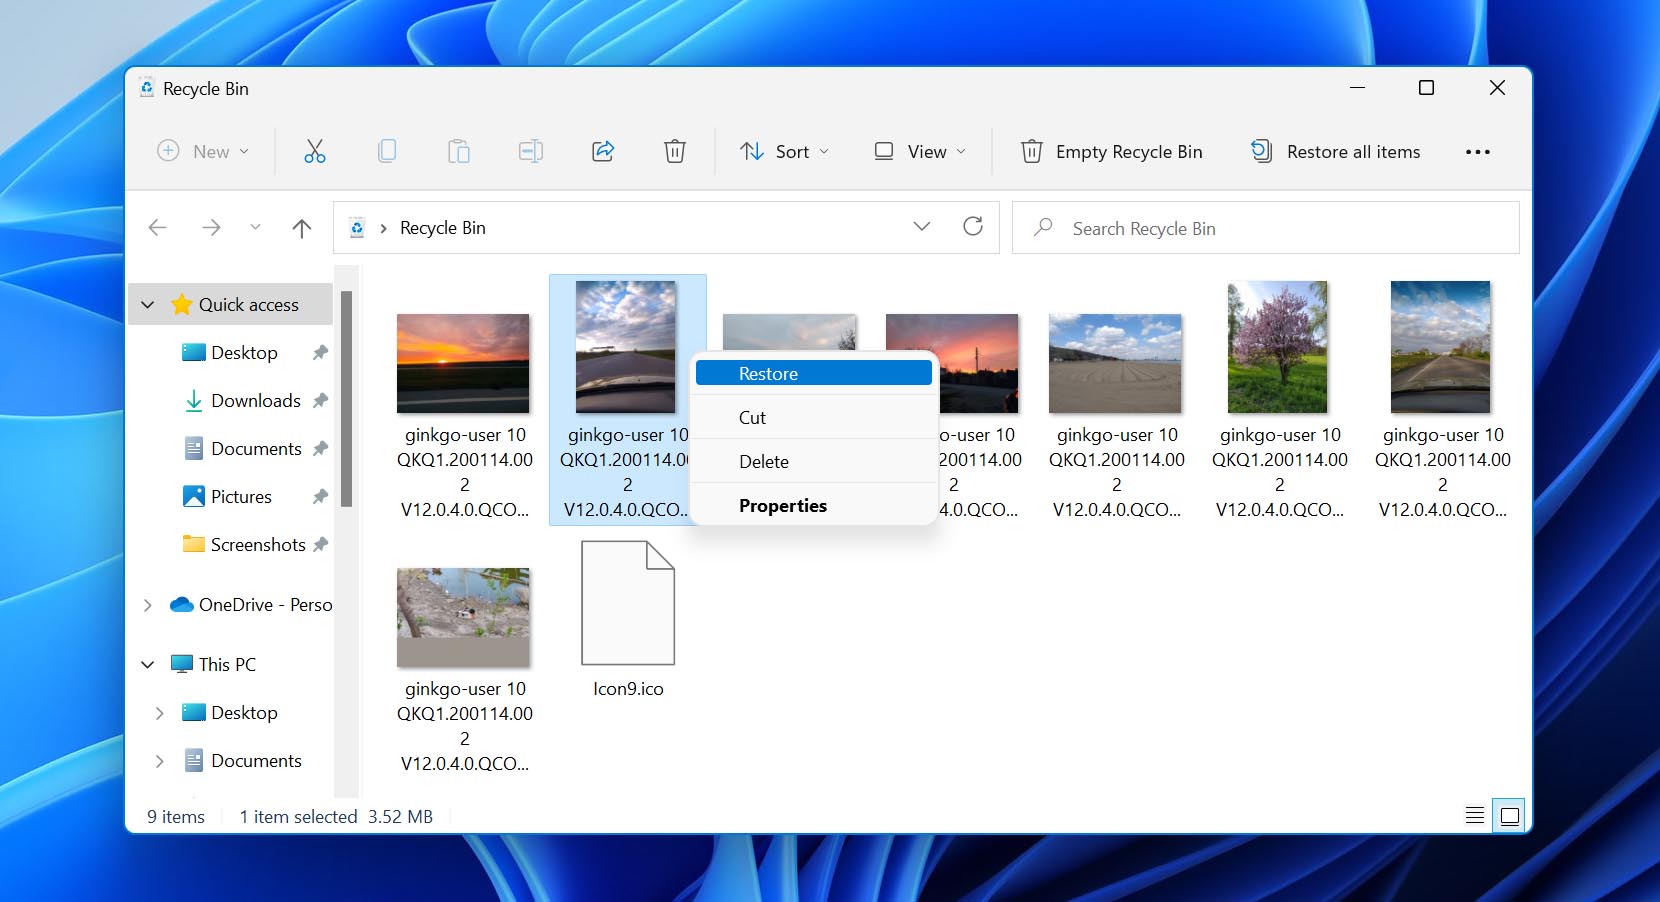 recover deleted photos from a recycle bin on your computer